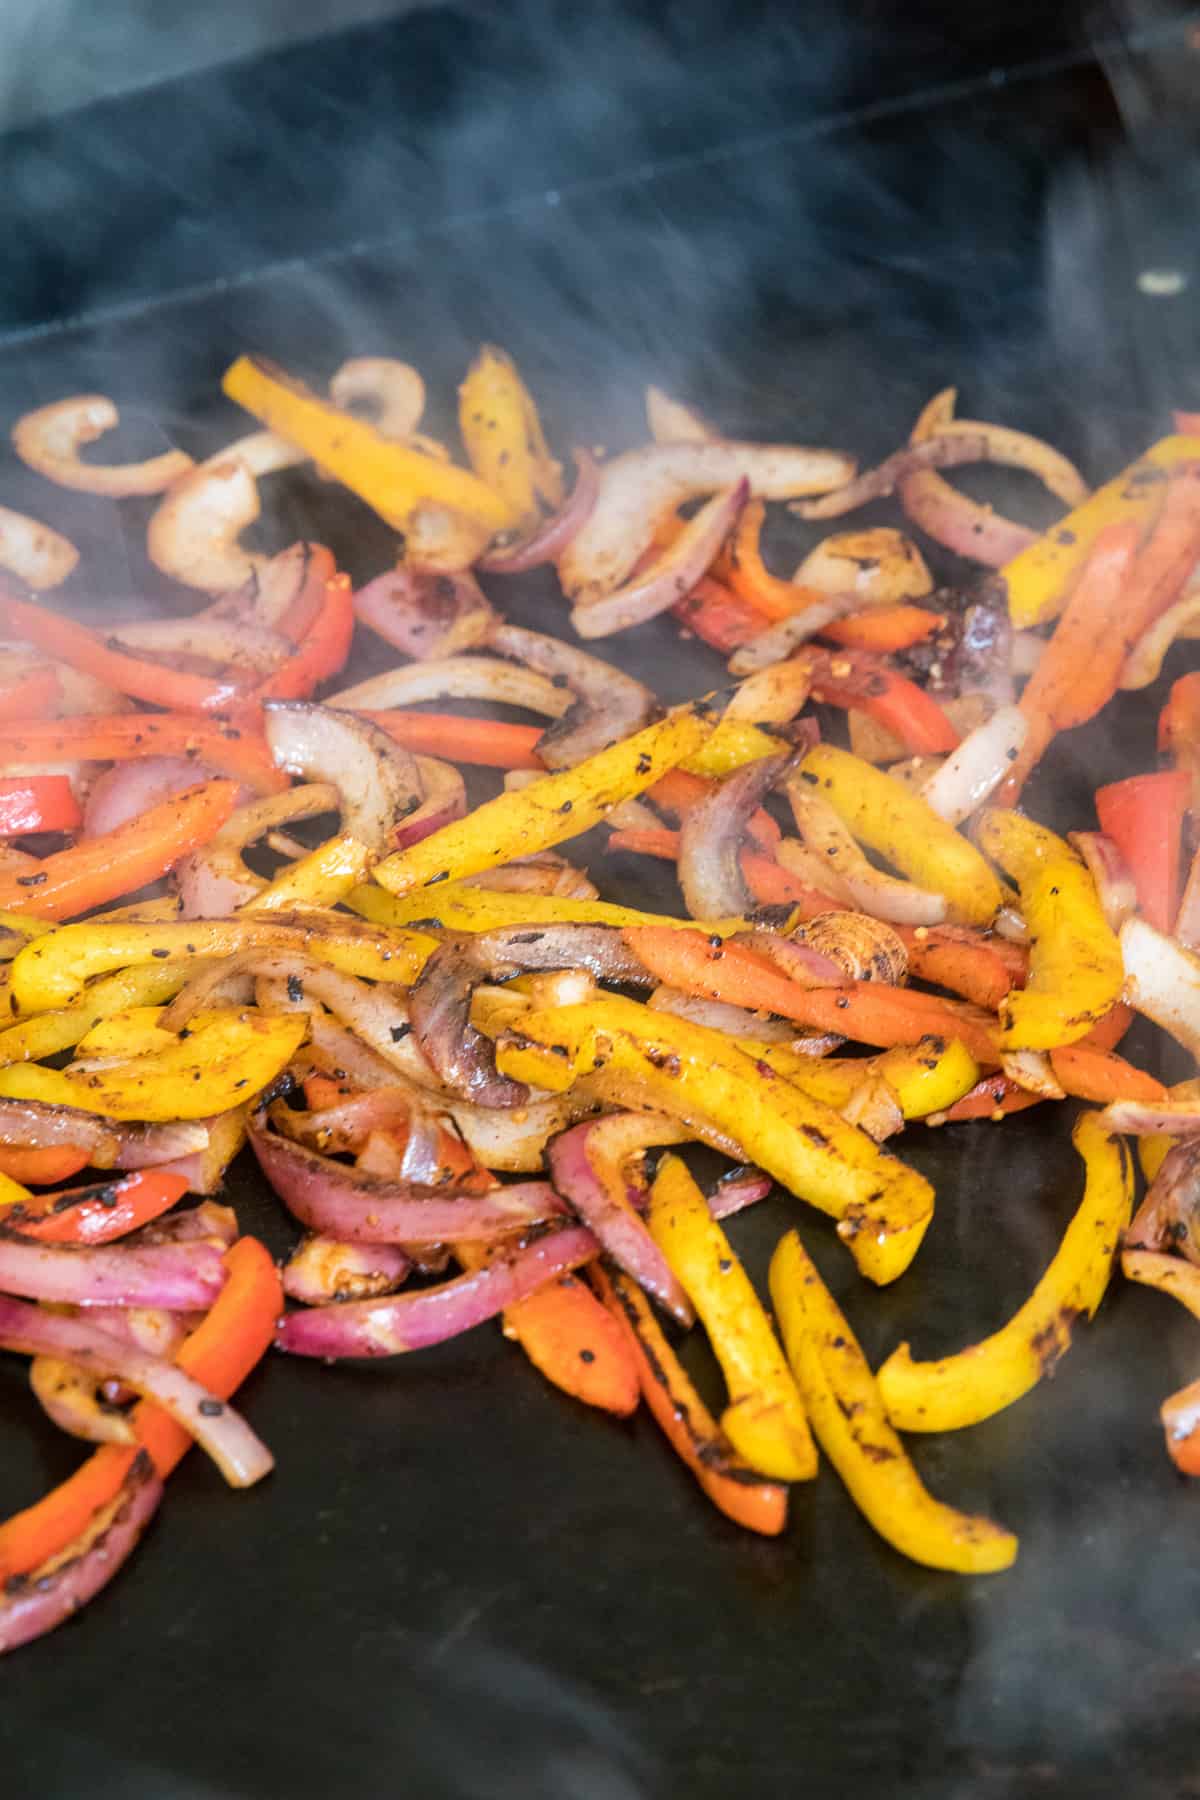 Fajita vegetables cooked on outdoor griddle